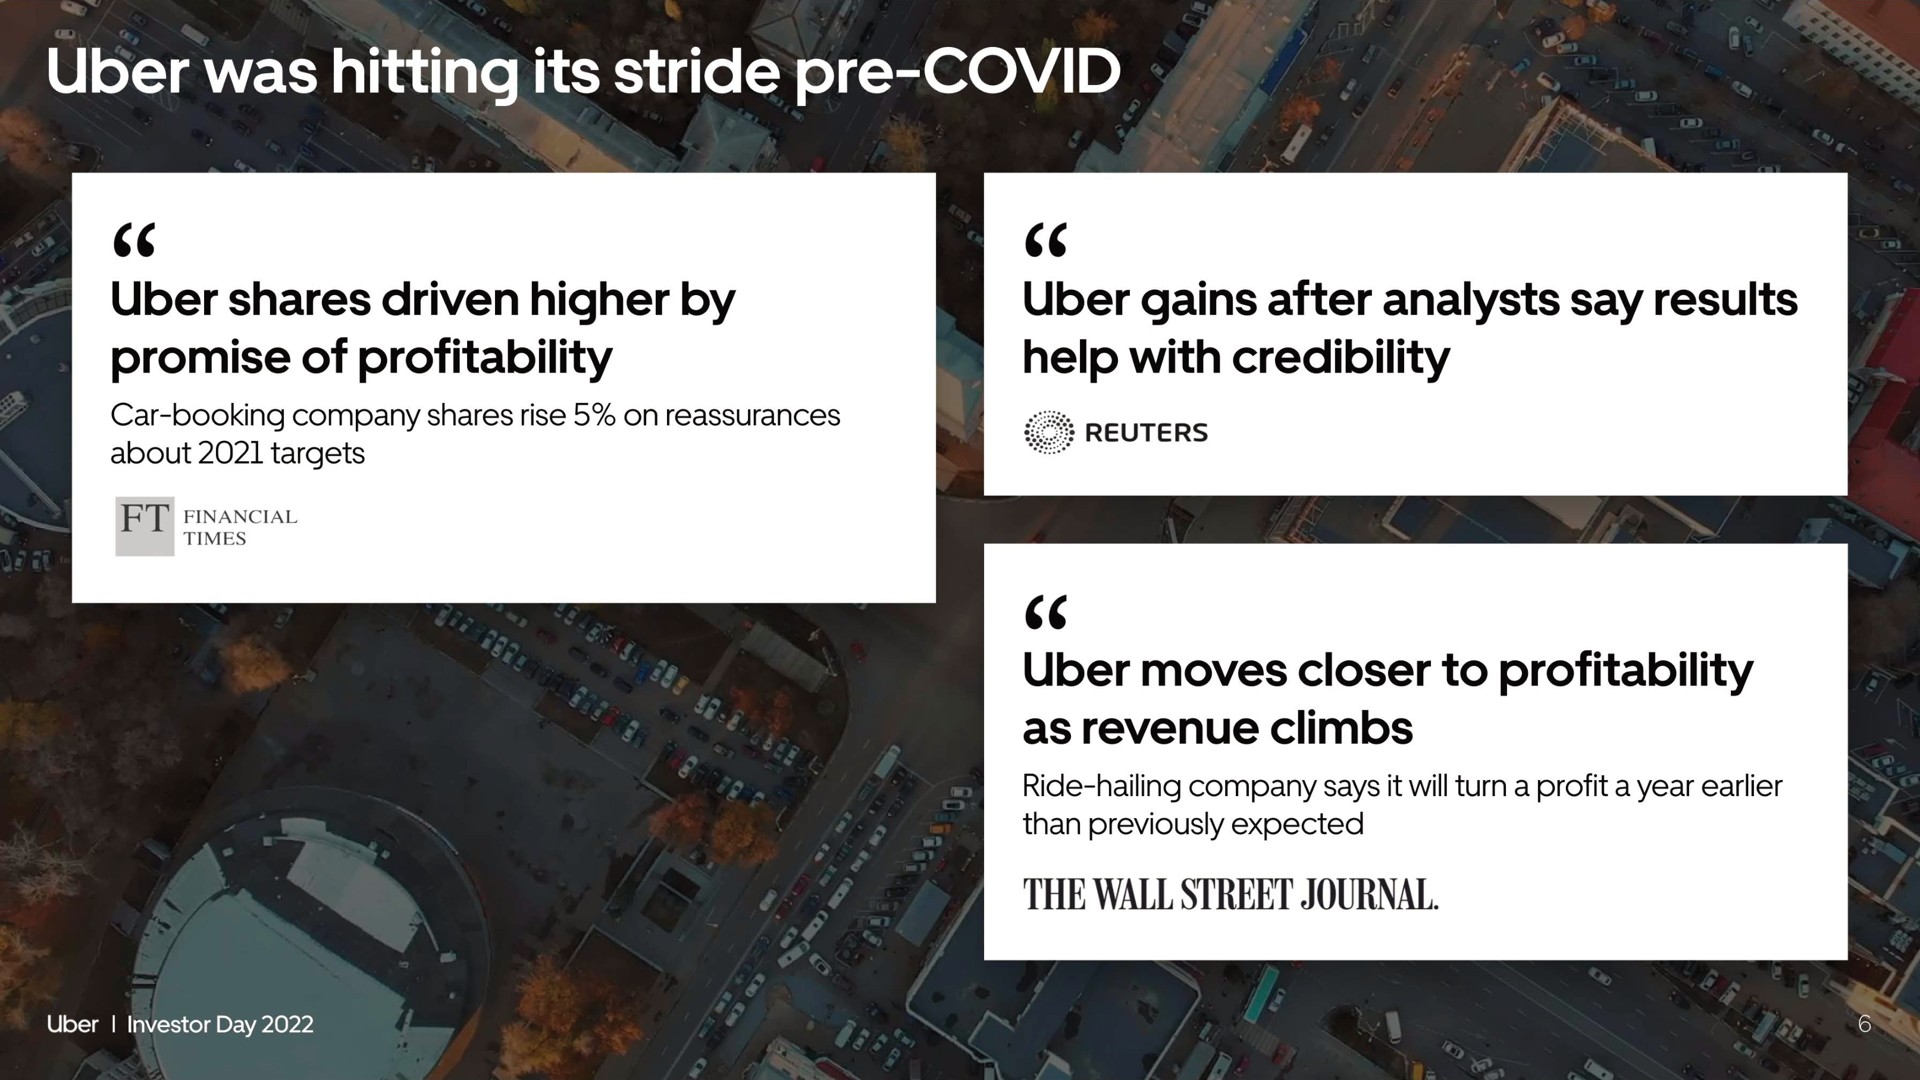 was hitting its stride covid shares driven higher by promise of profitability gains after analysts say results help with credibility the wall street journal moves closer to profitability | Uber